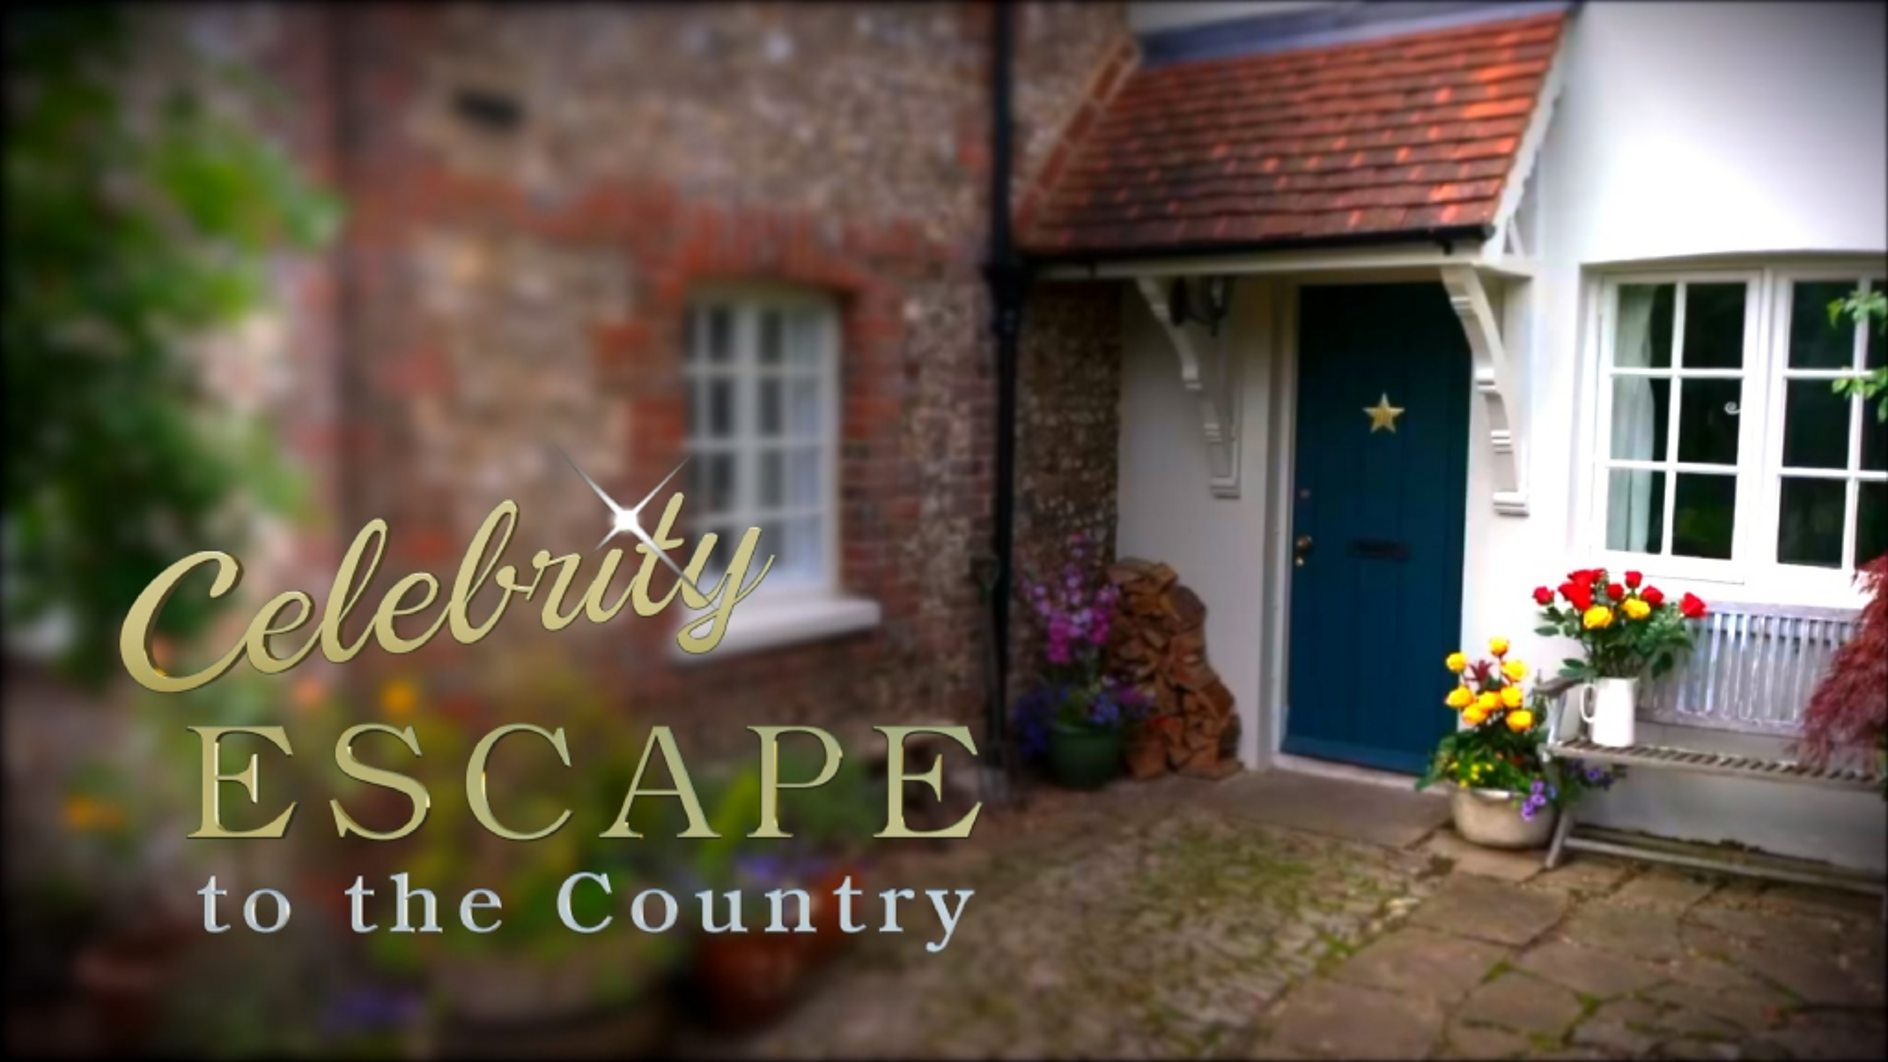 First ever Escape to the Country celebrity specials set to arrive on BBC One and BBC iPlayer